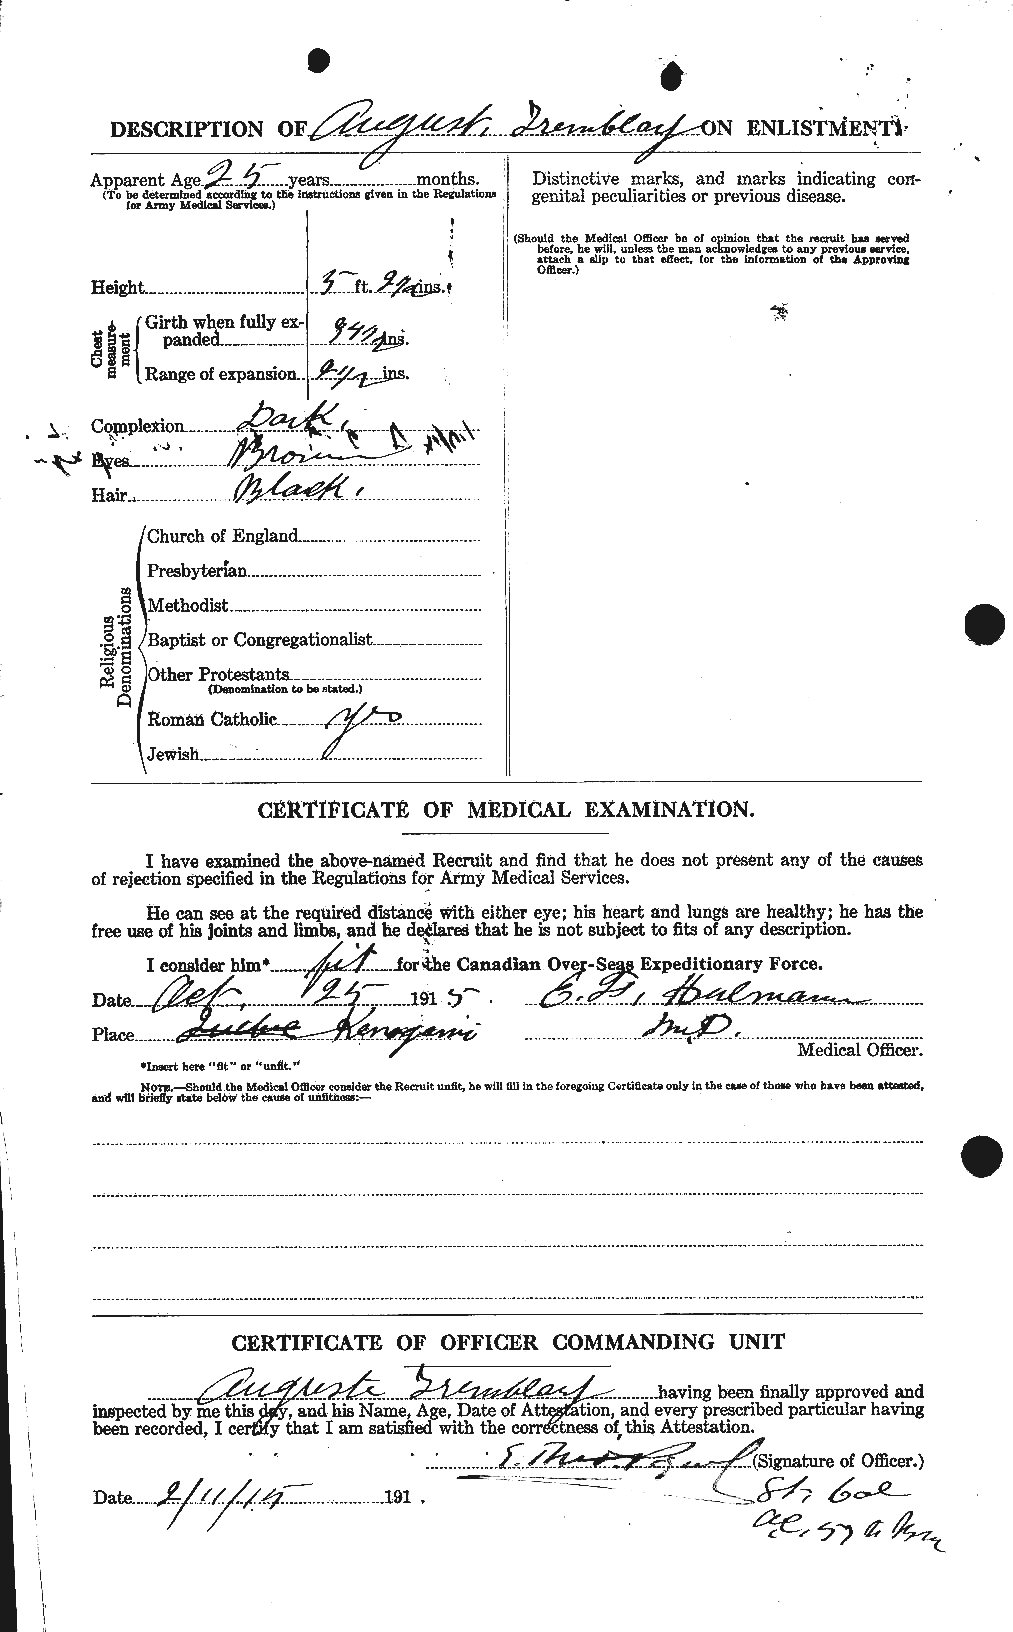 Personnel Records of the First World War - CEF 638975b